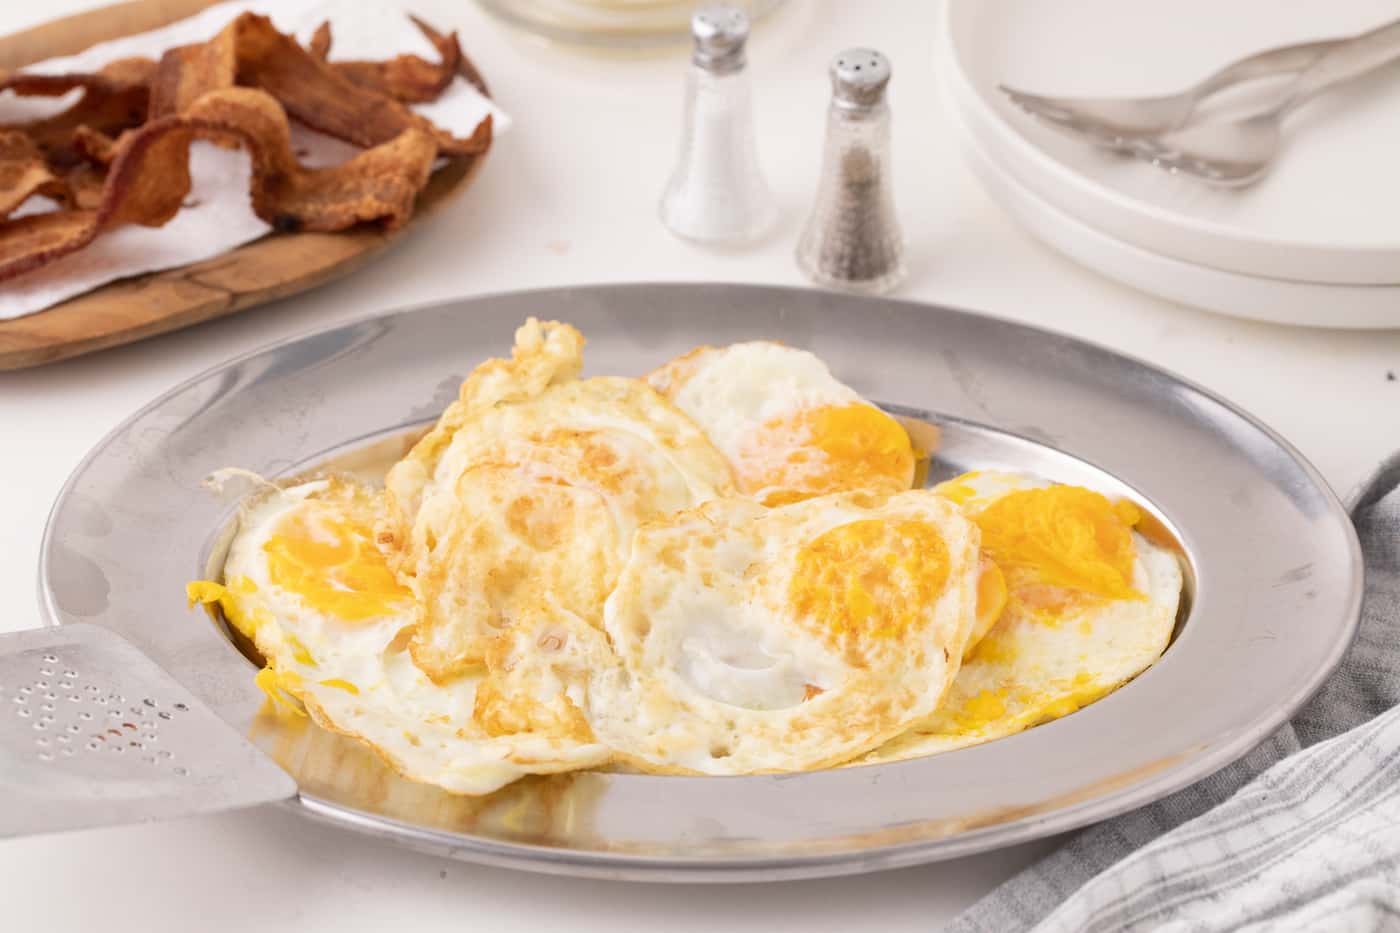 https://www.cleaneatingkitchen.com/wp-content/uploads/2021/04/over-medium-eggs-upclose-hero-for-recipe-card.jpg